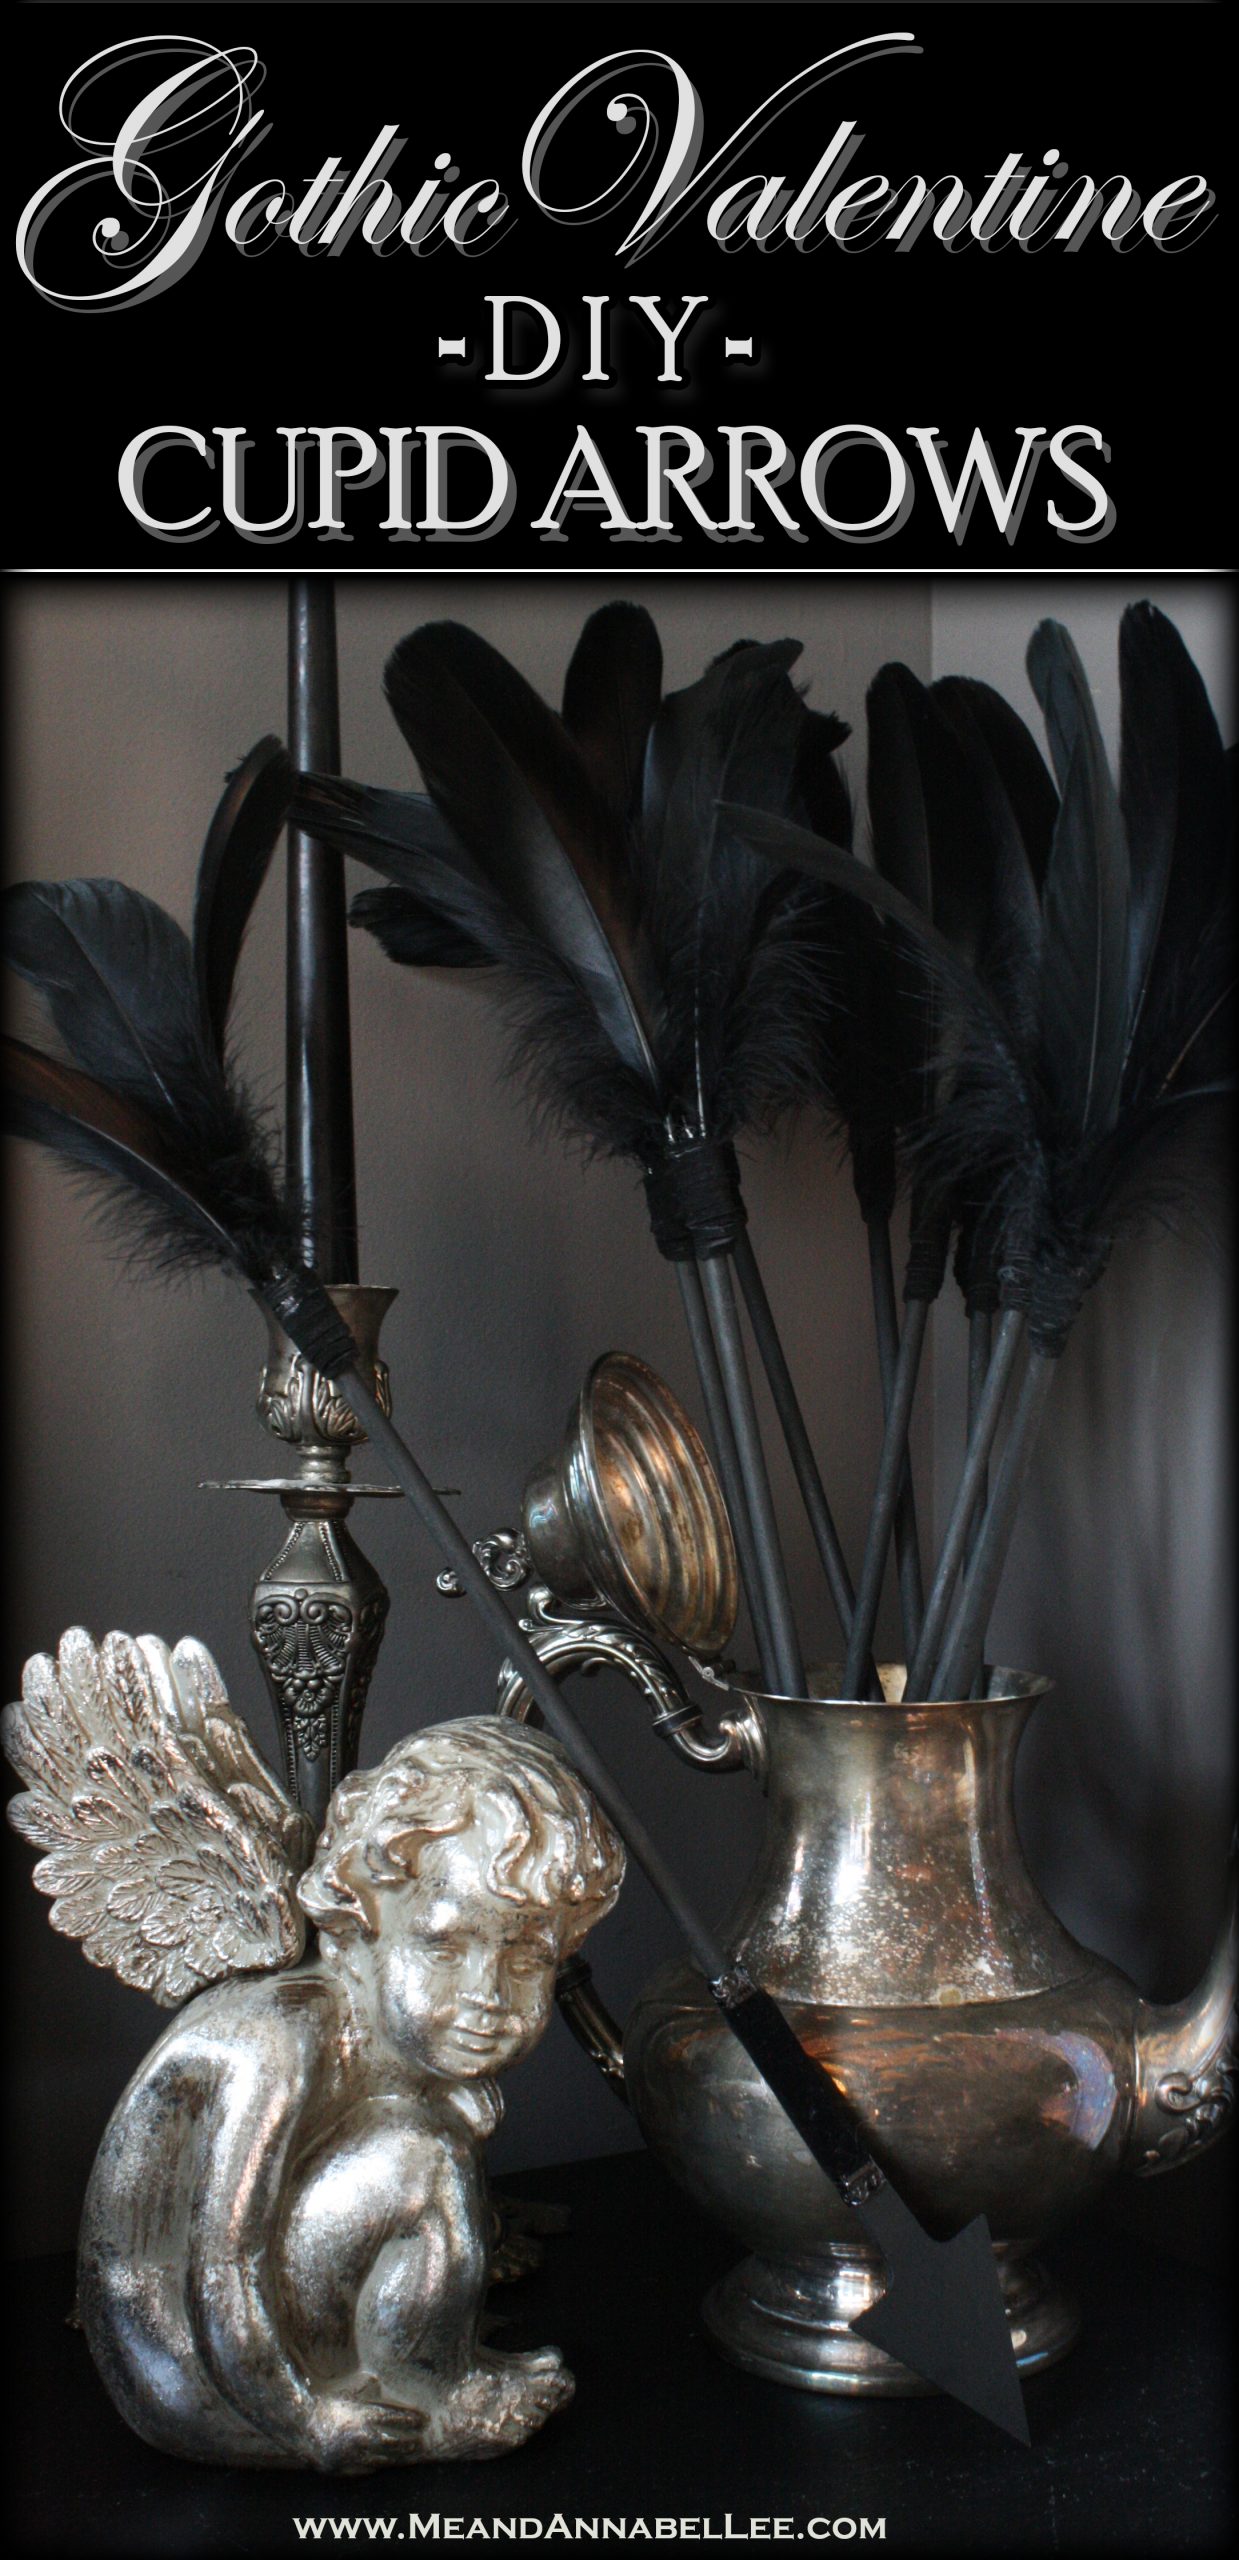 DIY Gothic Black Feathered Valentine Arrows | Goth it Yourself Valentine’s Day Décor | Add some Dark Romance to your Goth Home Decor with this twist on Cupid’s Arrow | Anti Valentine |Valoween | Me and Annabel Lee